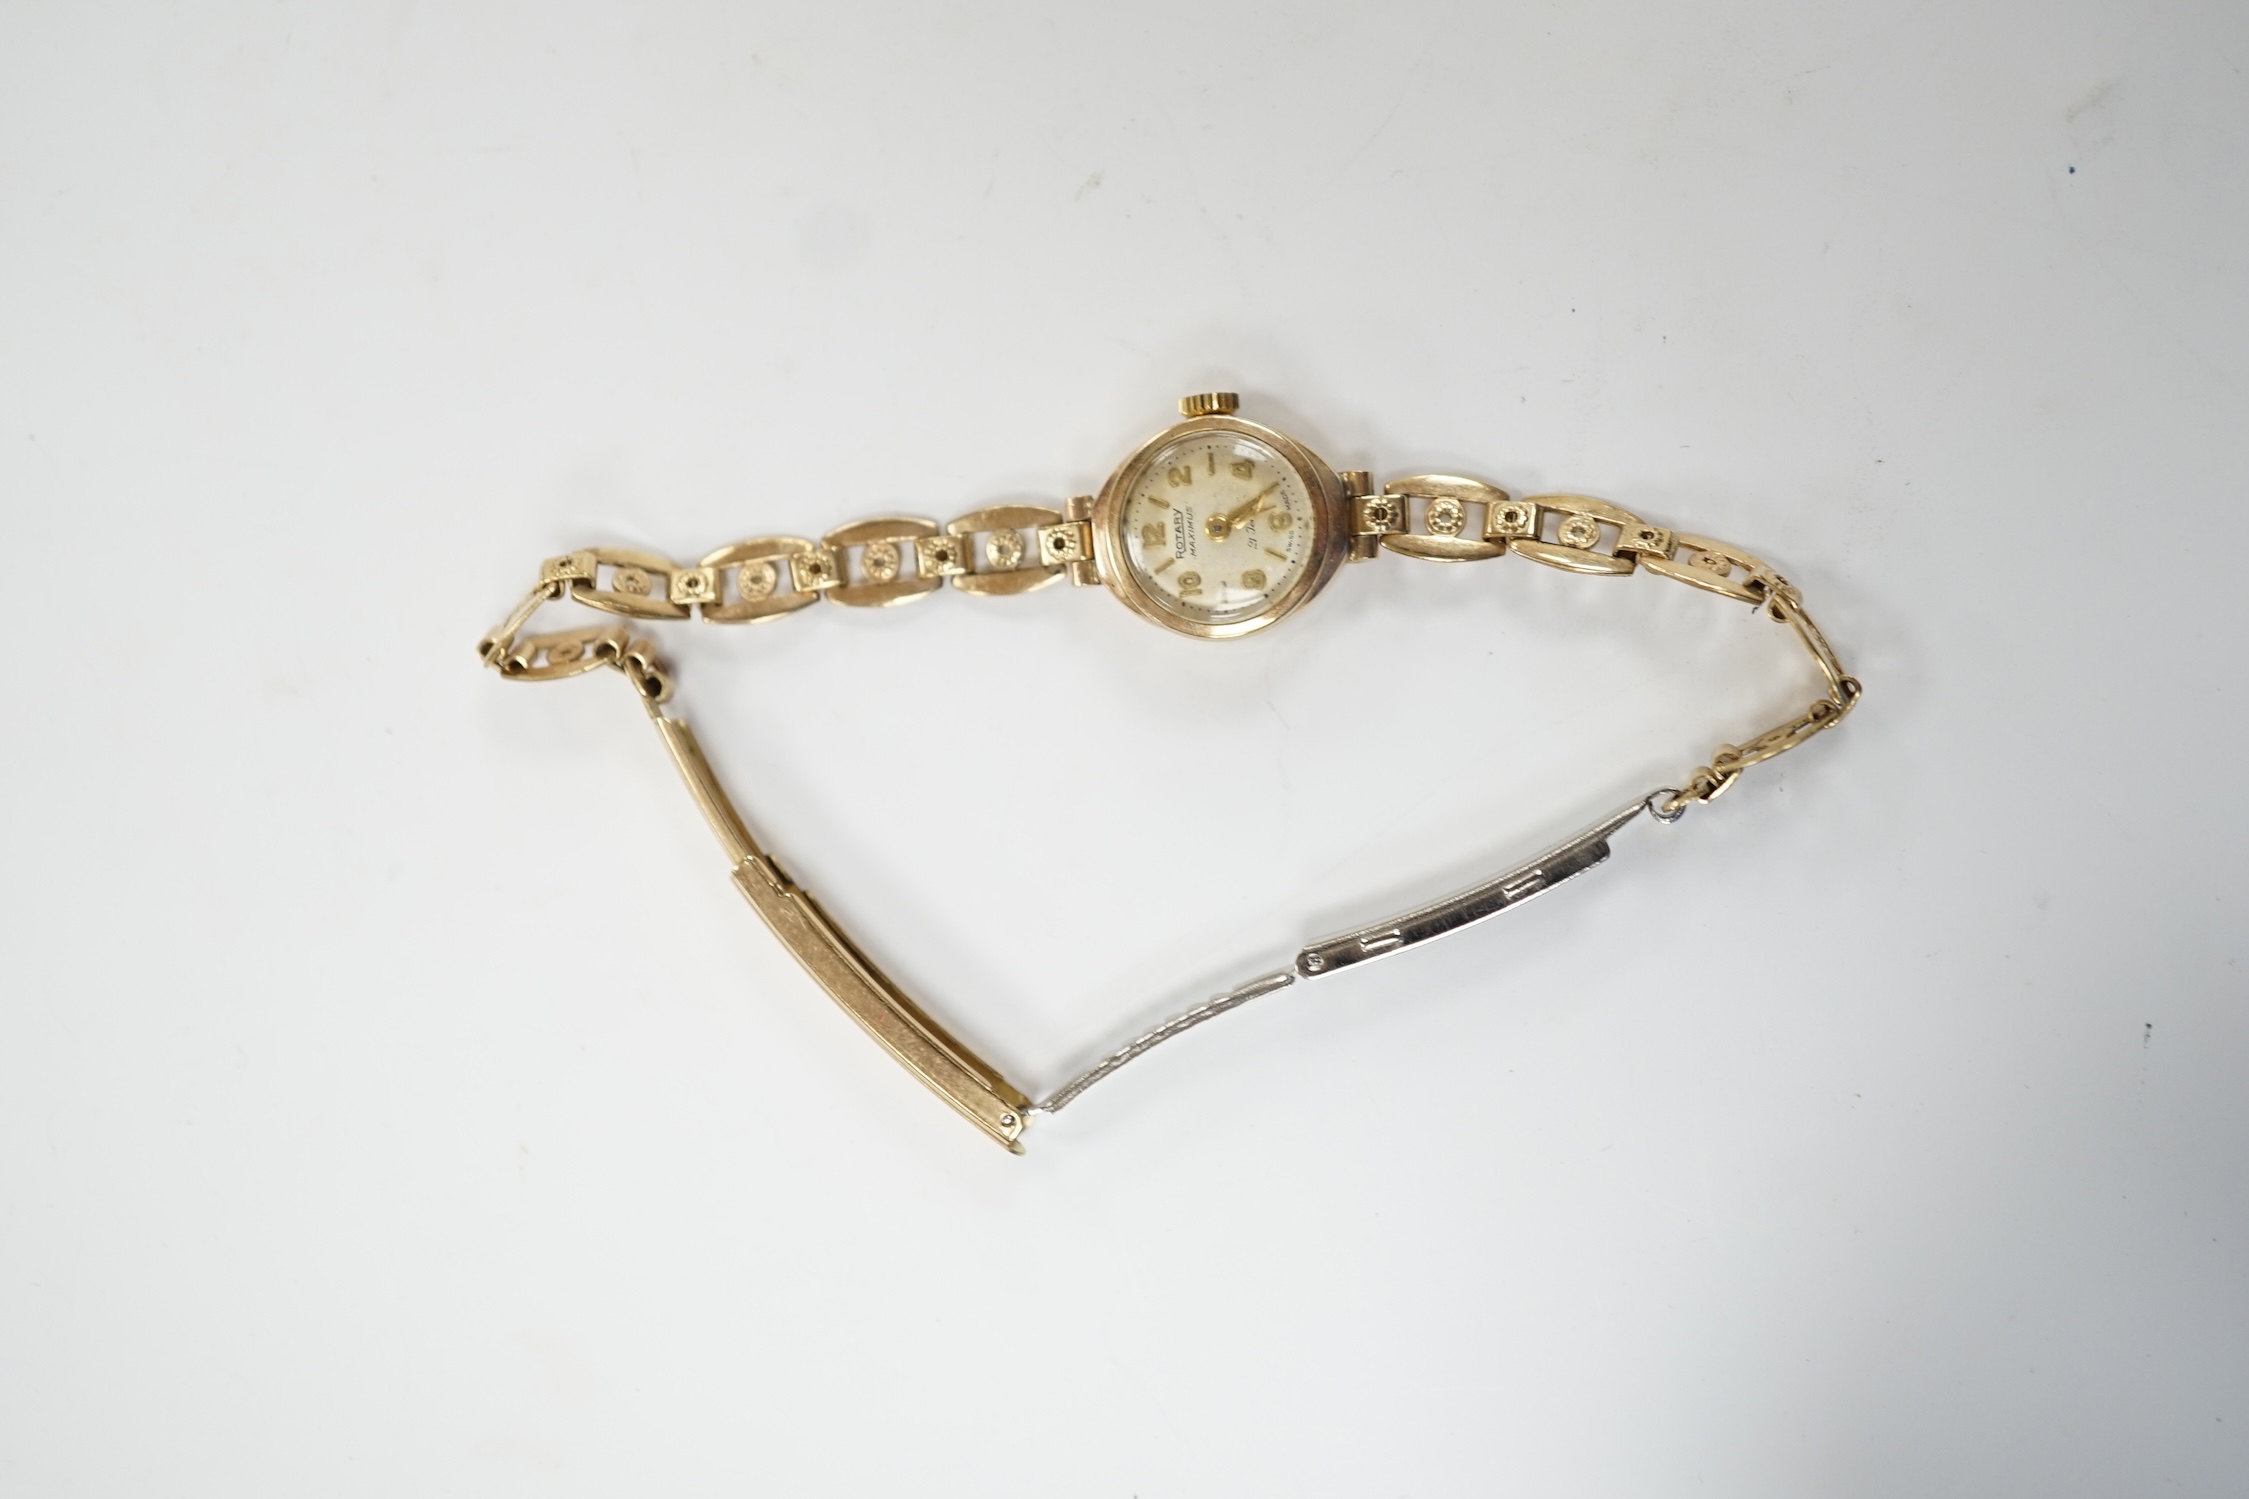 A lady's 9ct gold Rotary Maximus manual wind wrist watch, on a rolled gold bracelet. Fair condition.